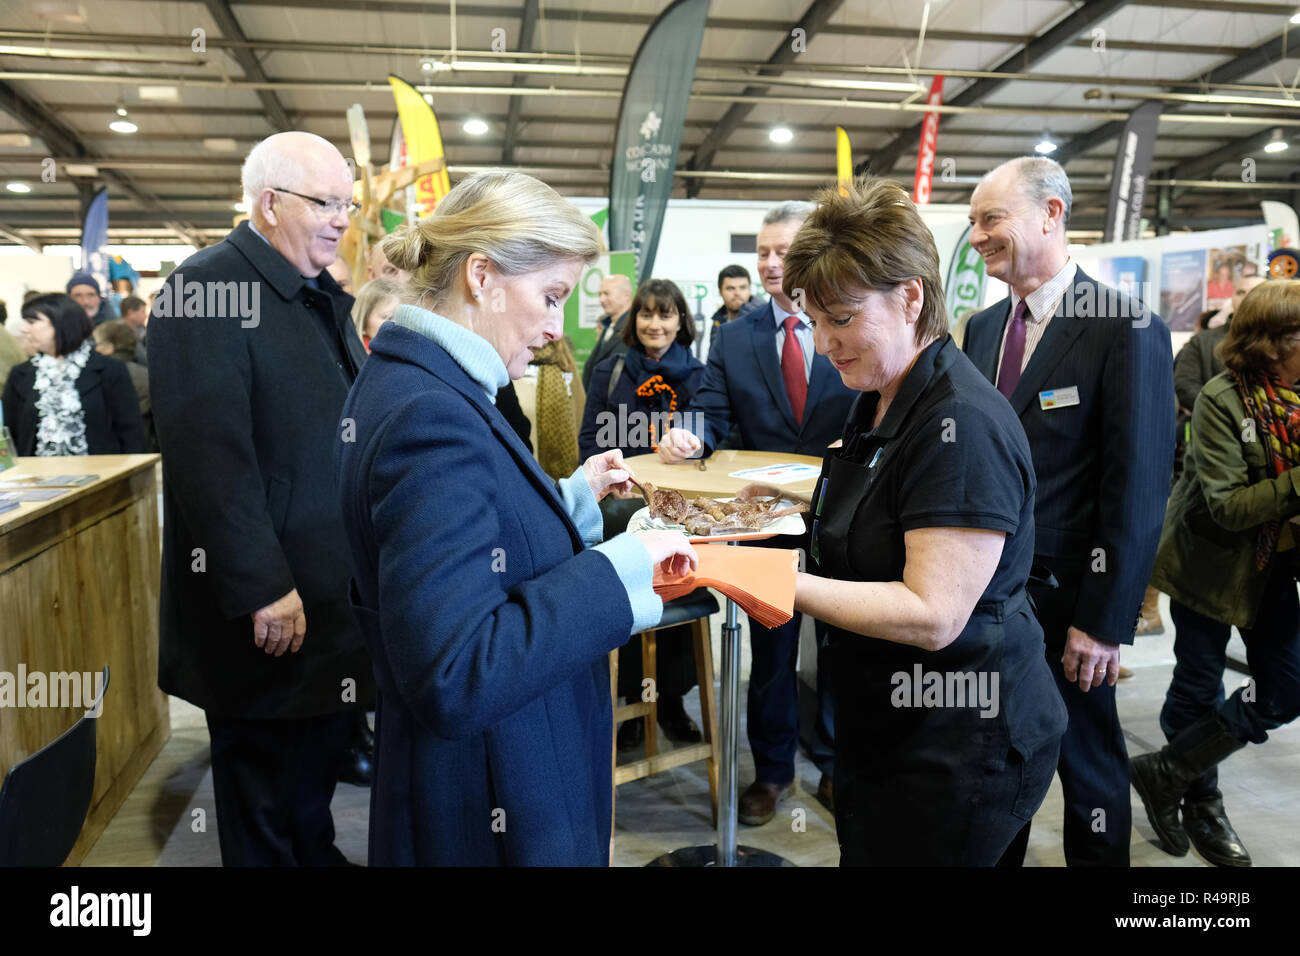 Royal Welsh Showground, Builth Wells, Powys, Wales, UK - Winter Fair - Monday 26th November 2018 - HRH The Countess of Wessex visits the Royal Welsh Winter Fair - Sophie seen here being offered some freshly cooked Welsh lamb - Photo Steven May / Alamy Live News Stock Photo